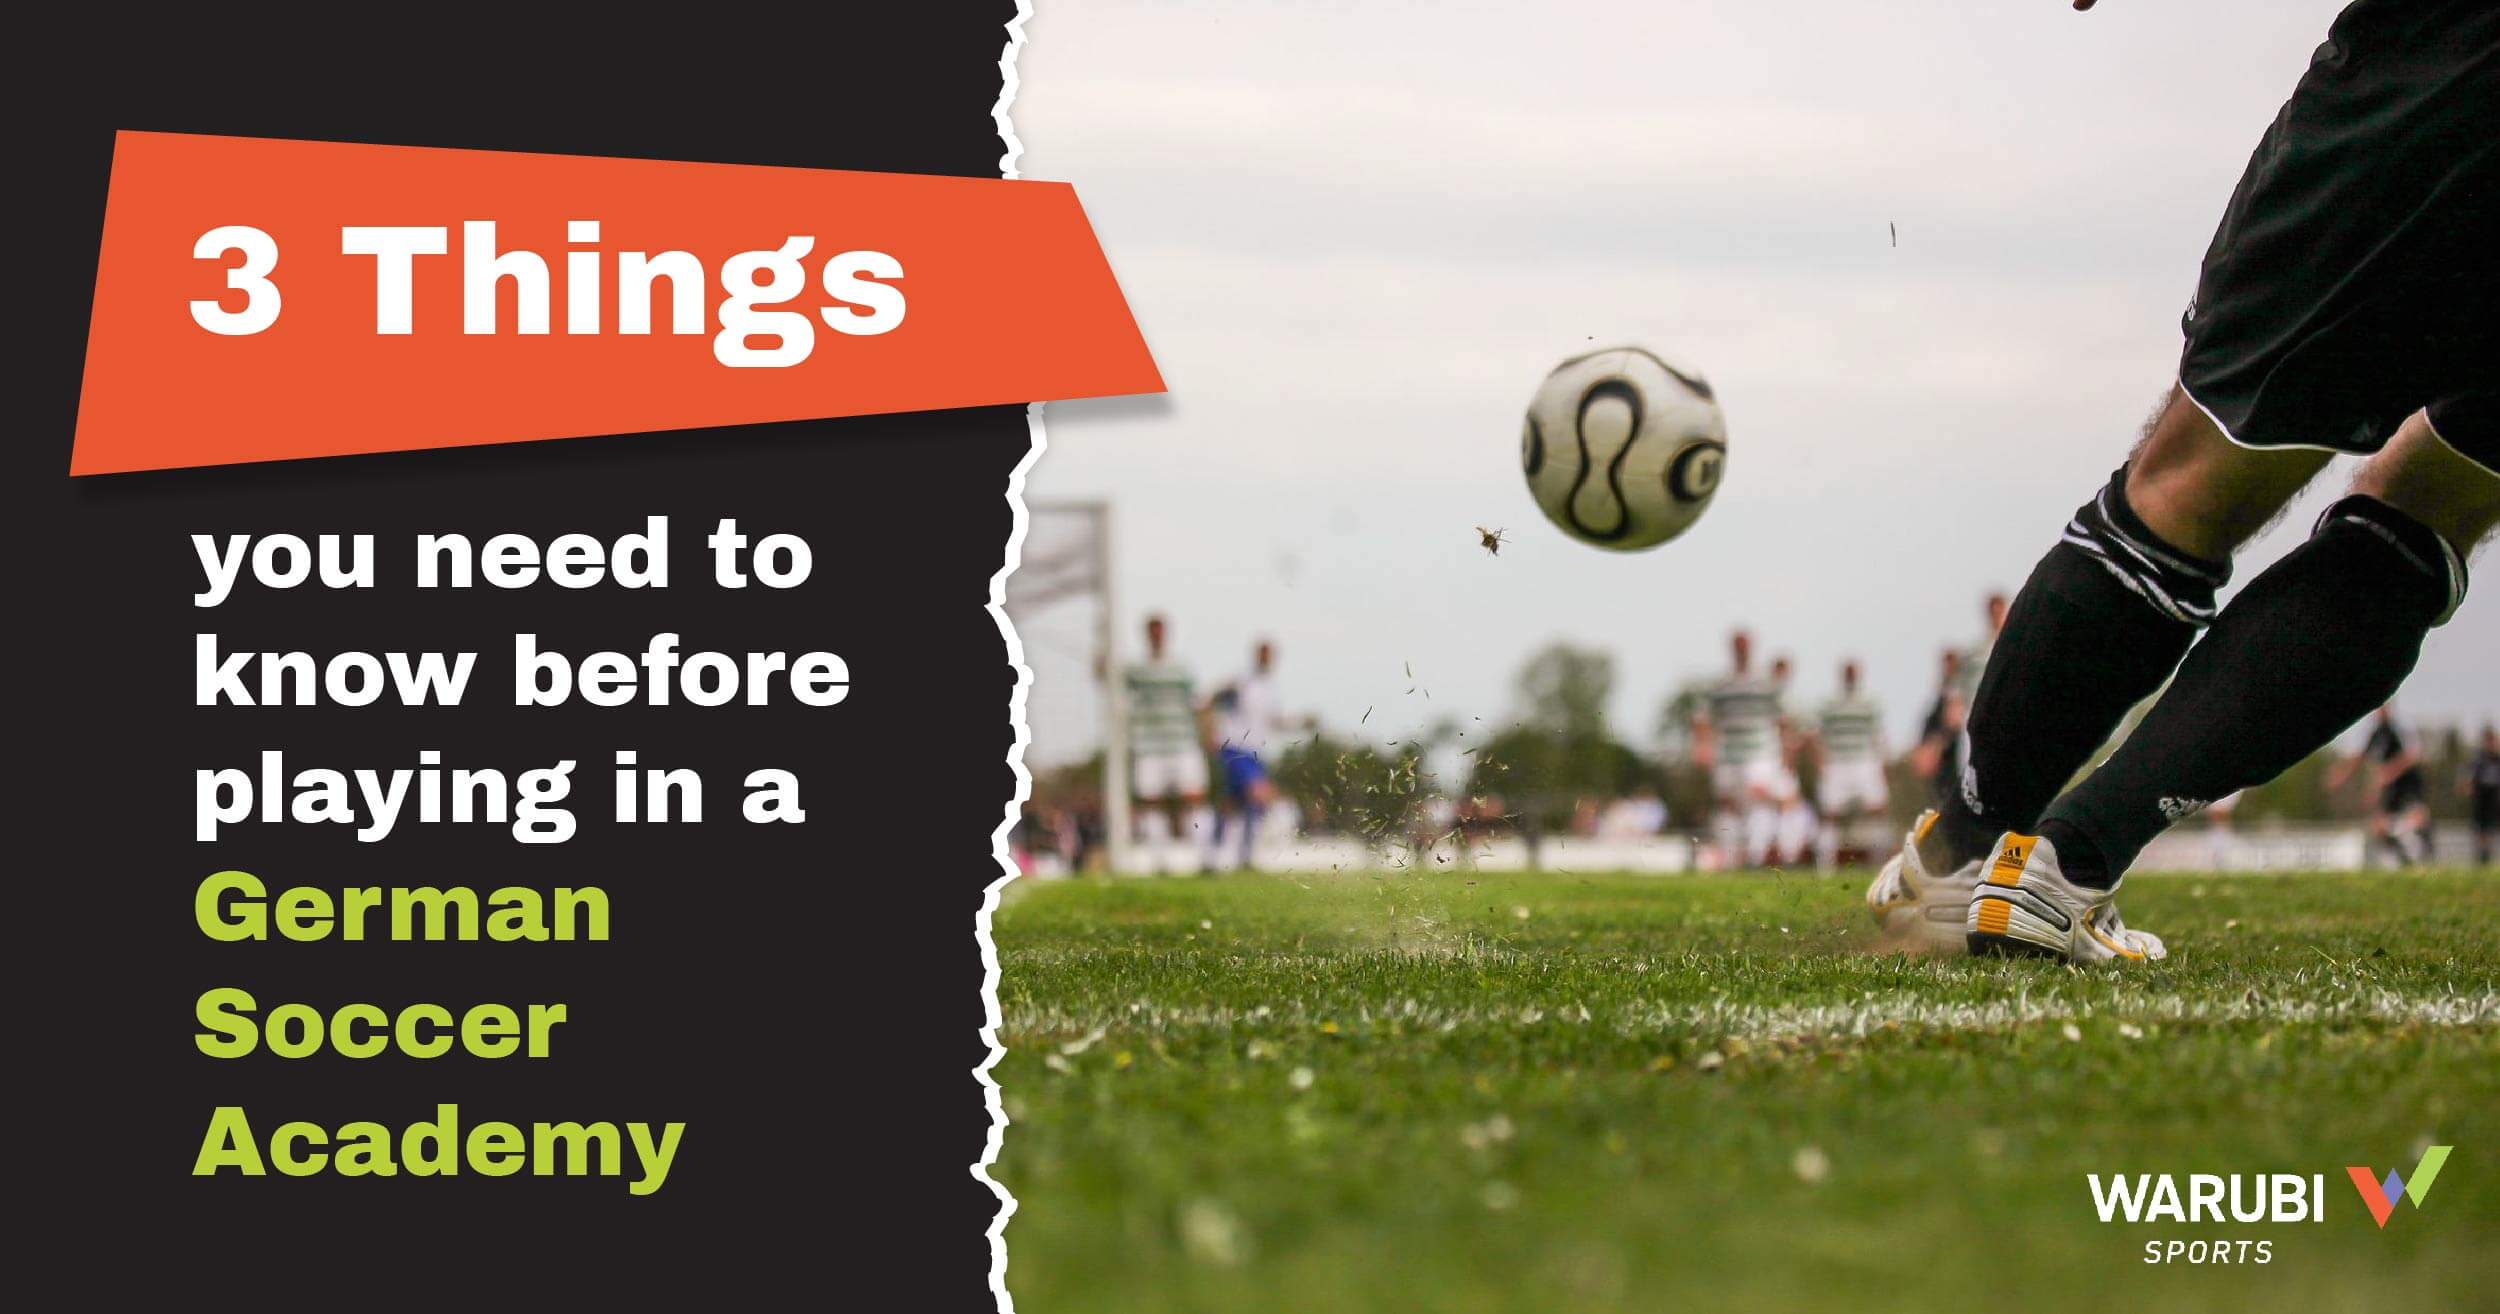 3 things you need to know before playing in a German Soccer Academy